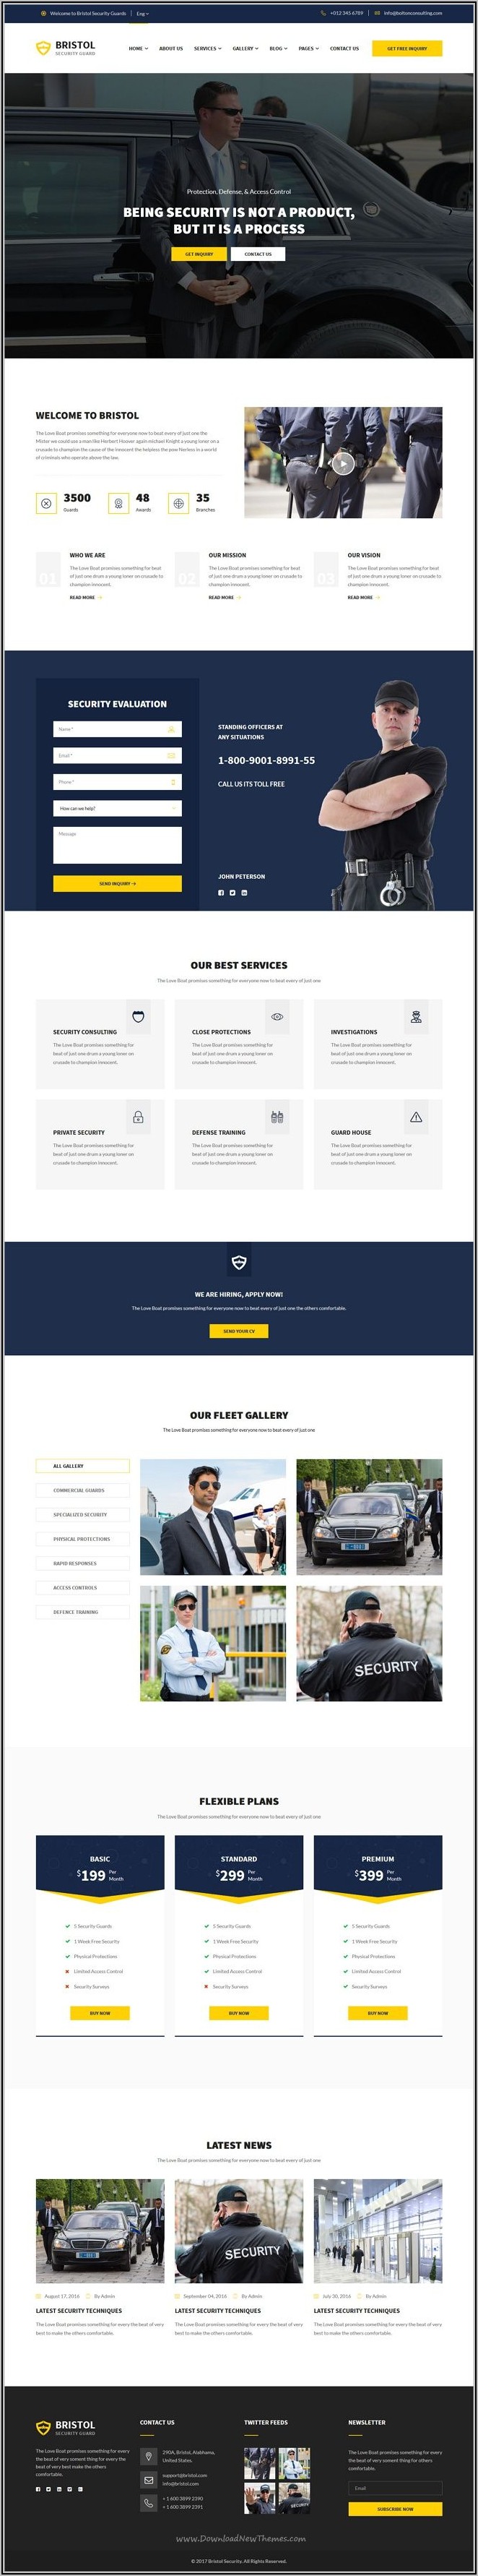 Security Guard Company Website Template Free Download